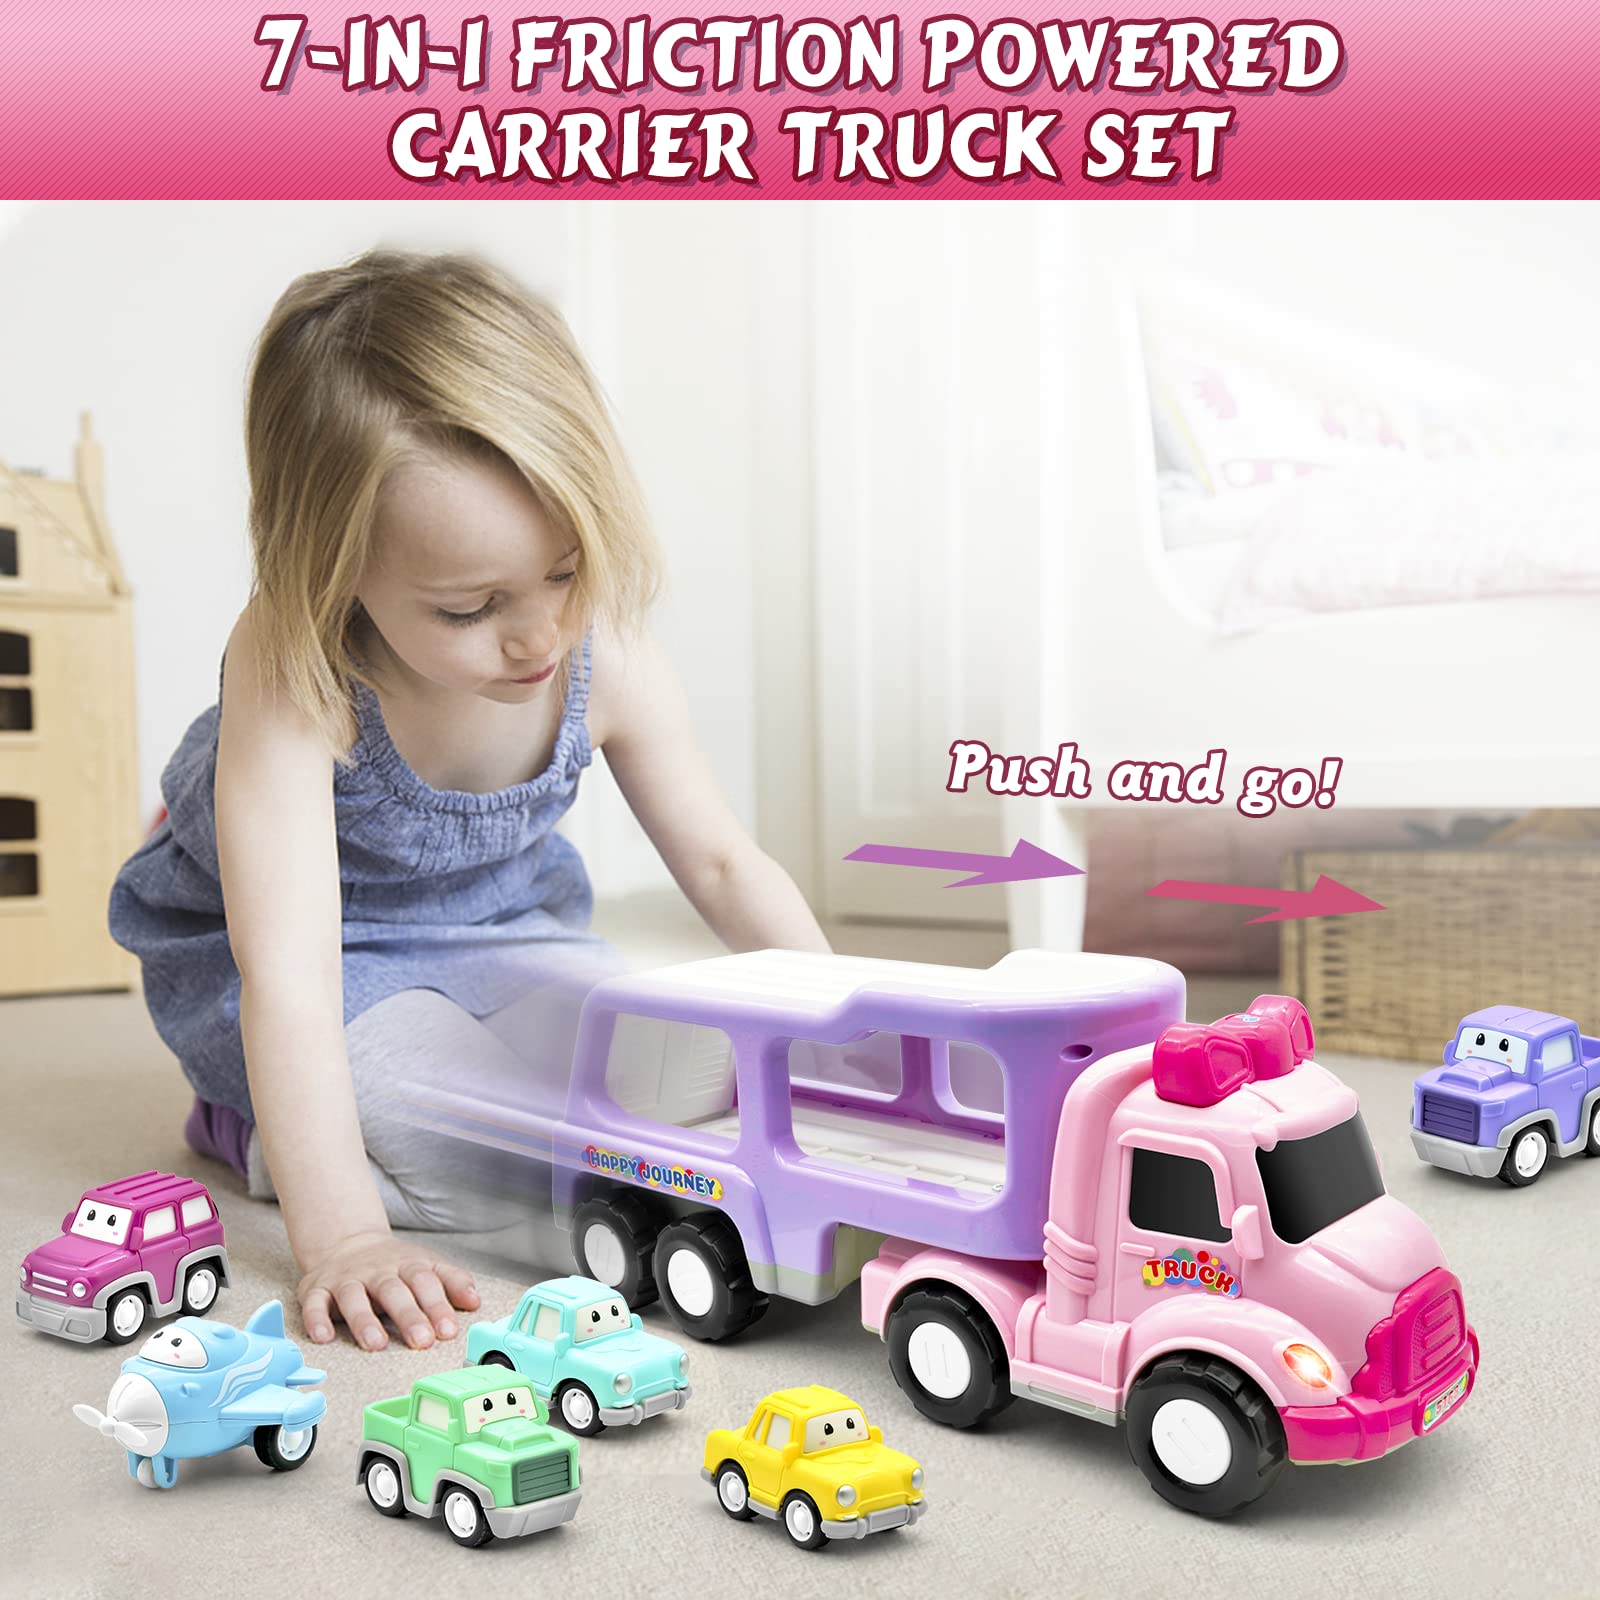 LASCOTON Toys for 1 2 Year Old Girl, 7-in-1 Carrier Truck, Toddler Girl Toys, Friction Power Toy Cars with Light & Sound, 1 2 3 Year Old Girl Gifts Birthday for Kids Girls Pink Toy